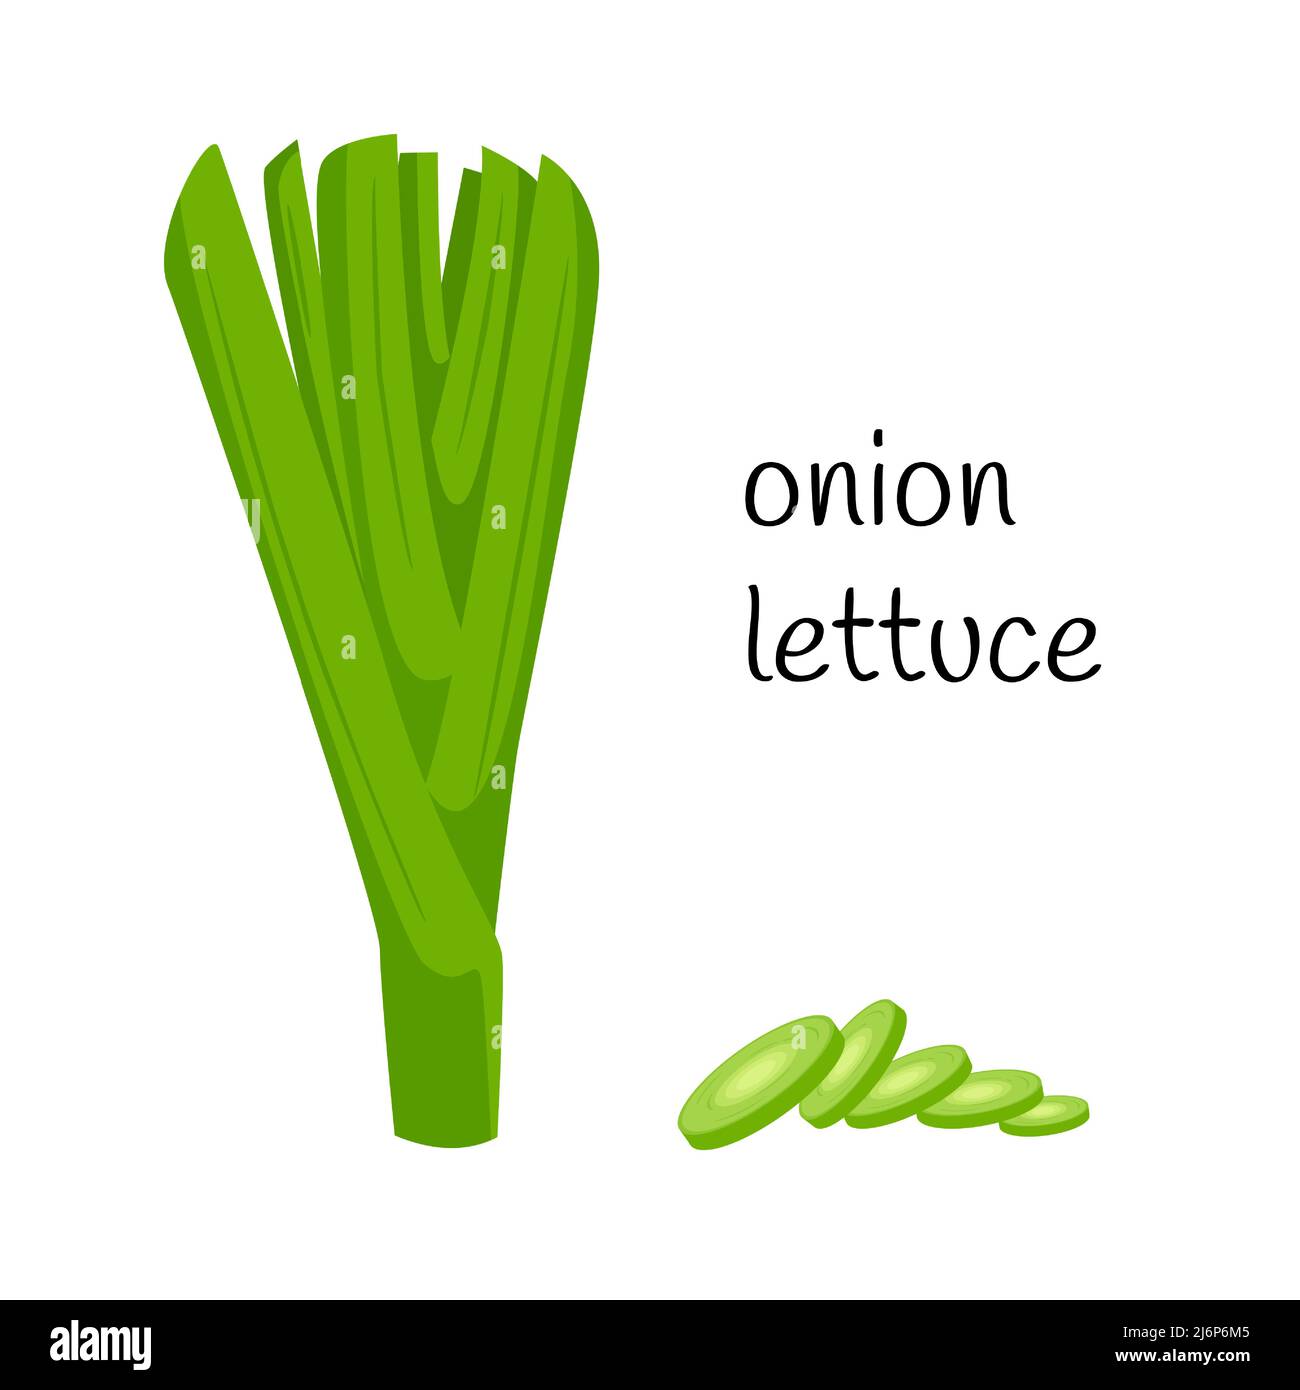 Onion-lettuce. The stems of green onions. Ingredient, an element for the design of food packaging, recipes, and menus. Isolated on a white background Stock Vector